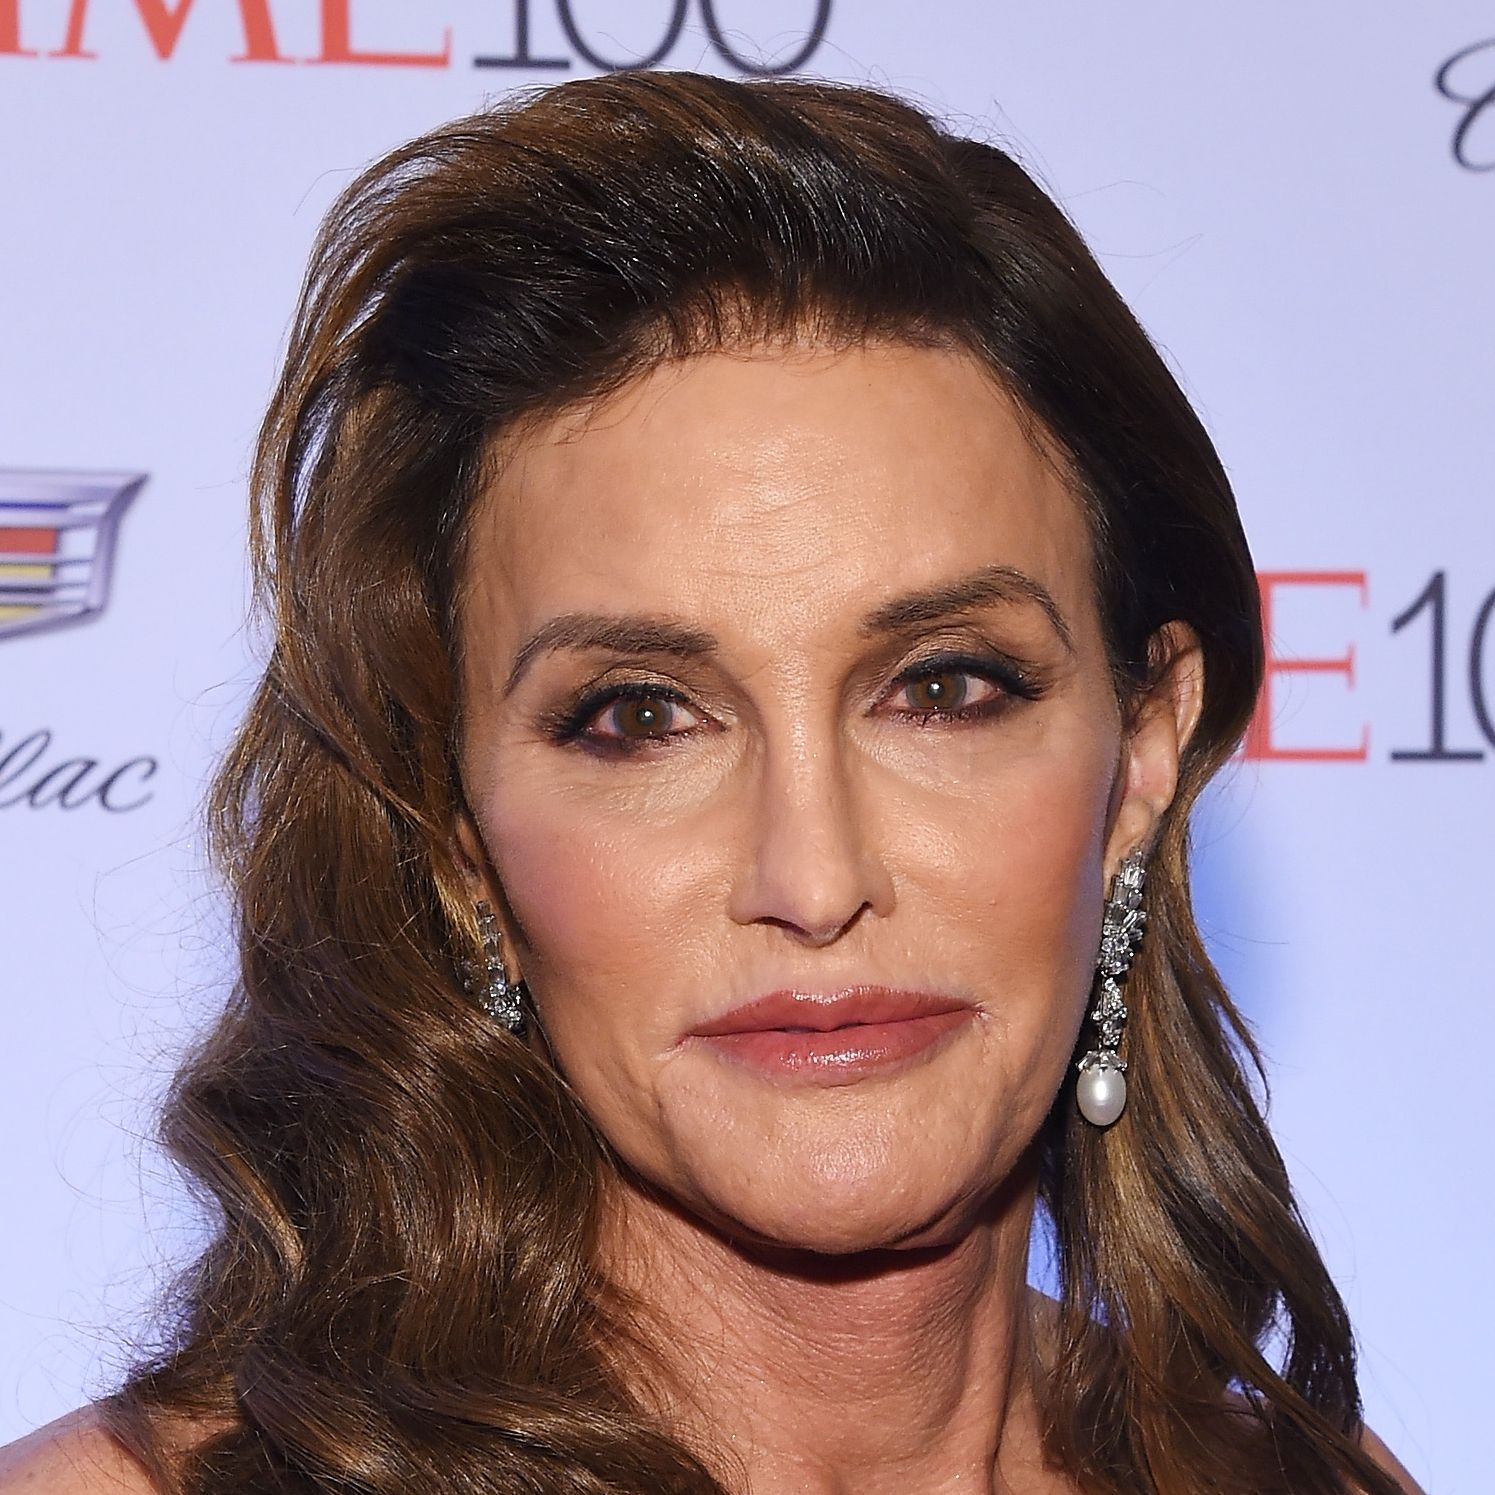 Caitlyn-Jenner_GettyImages-524690236.jpg